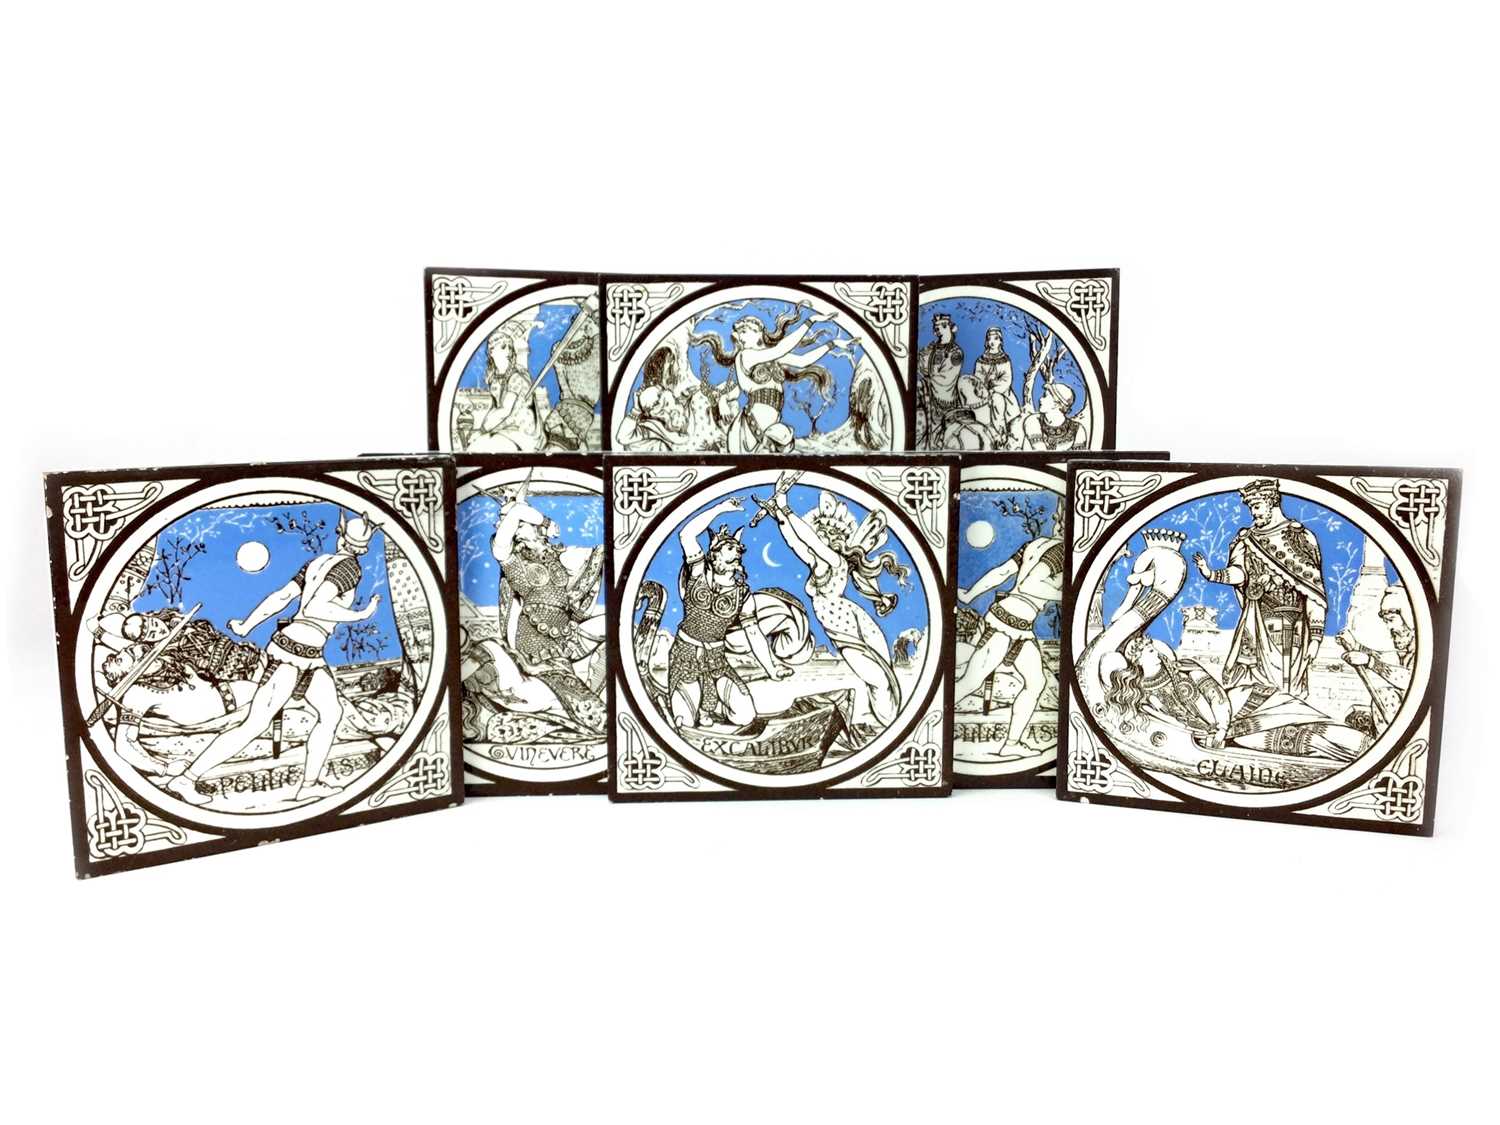 Lot 1006 - A SET OF EIGHT TILES BY JOHN MOYR SMITH FOR MINTON